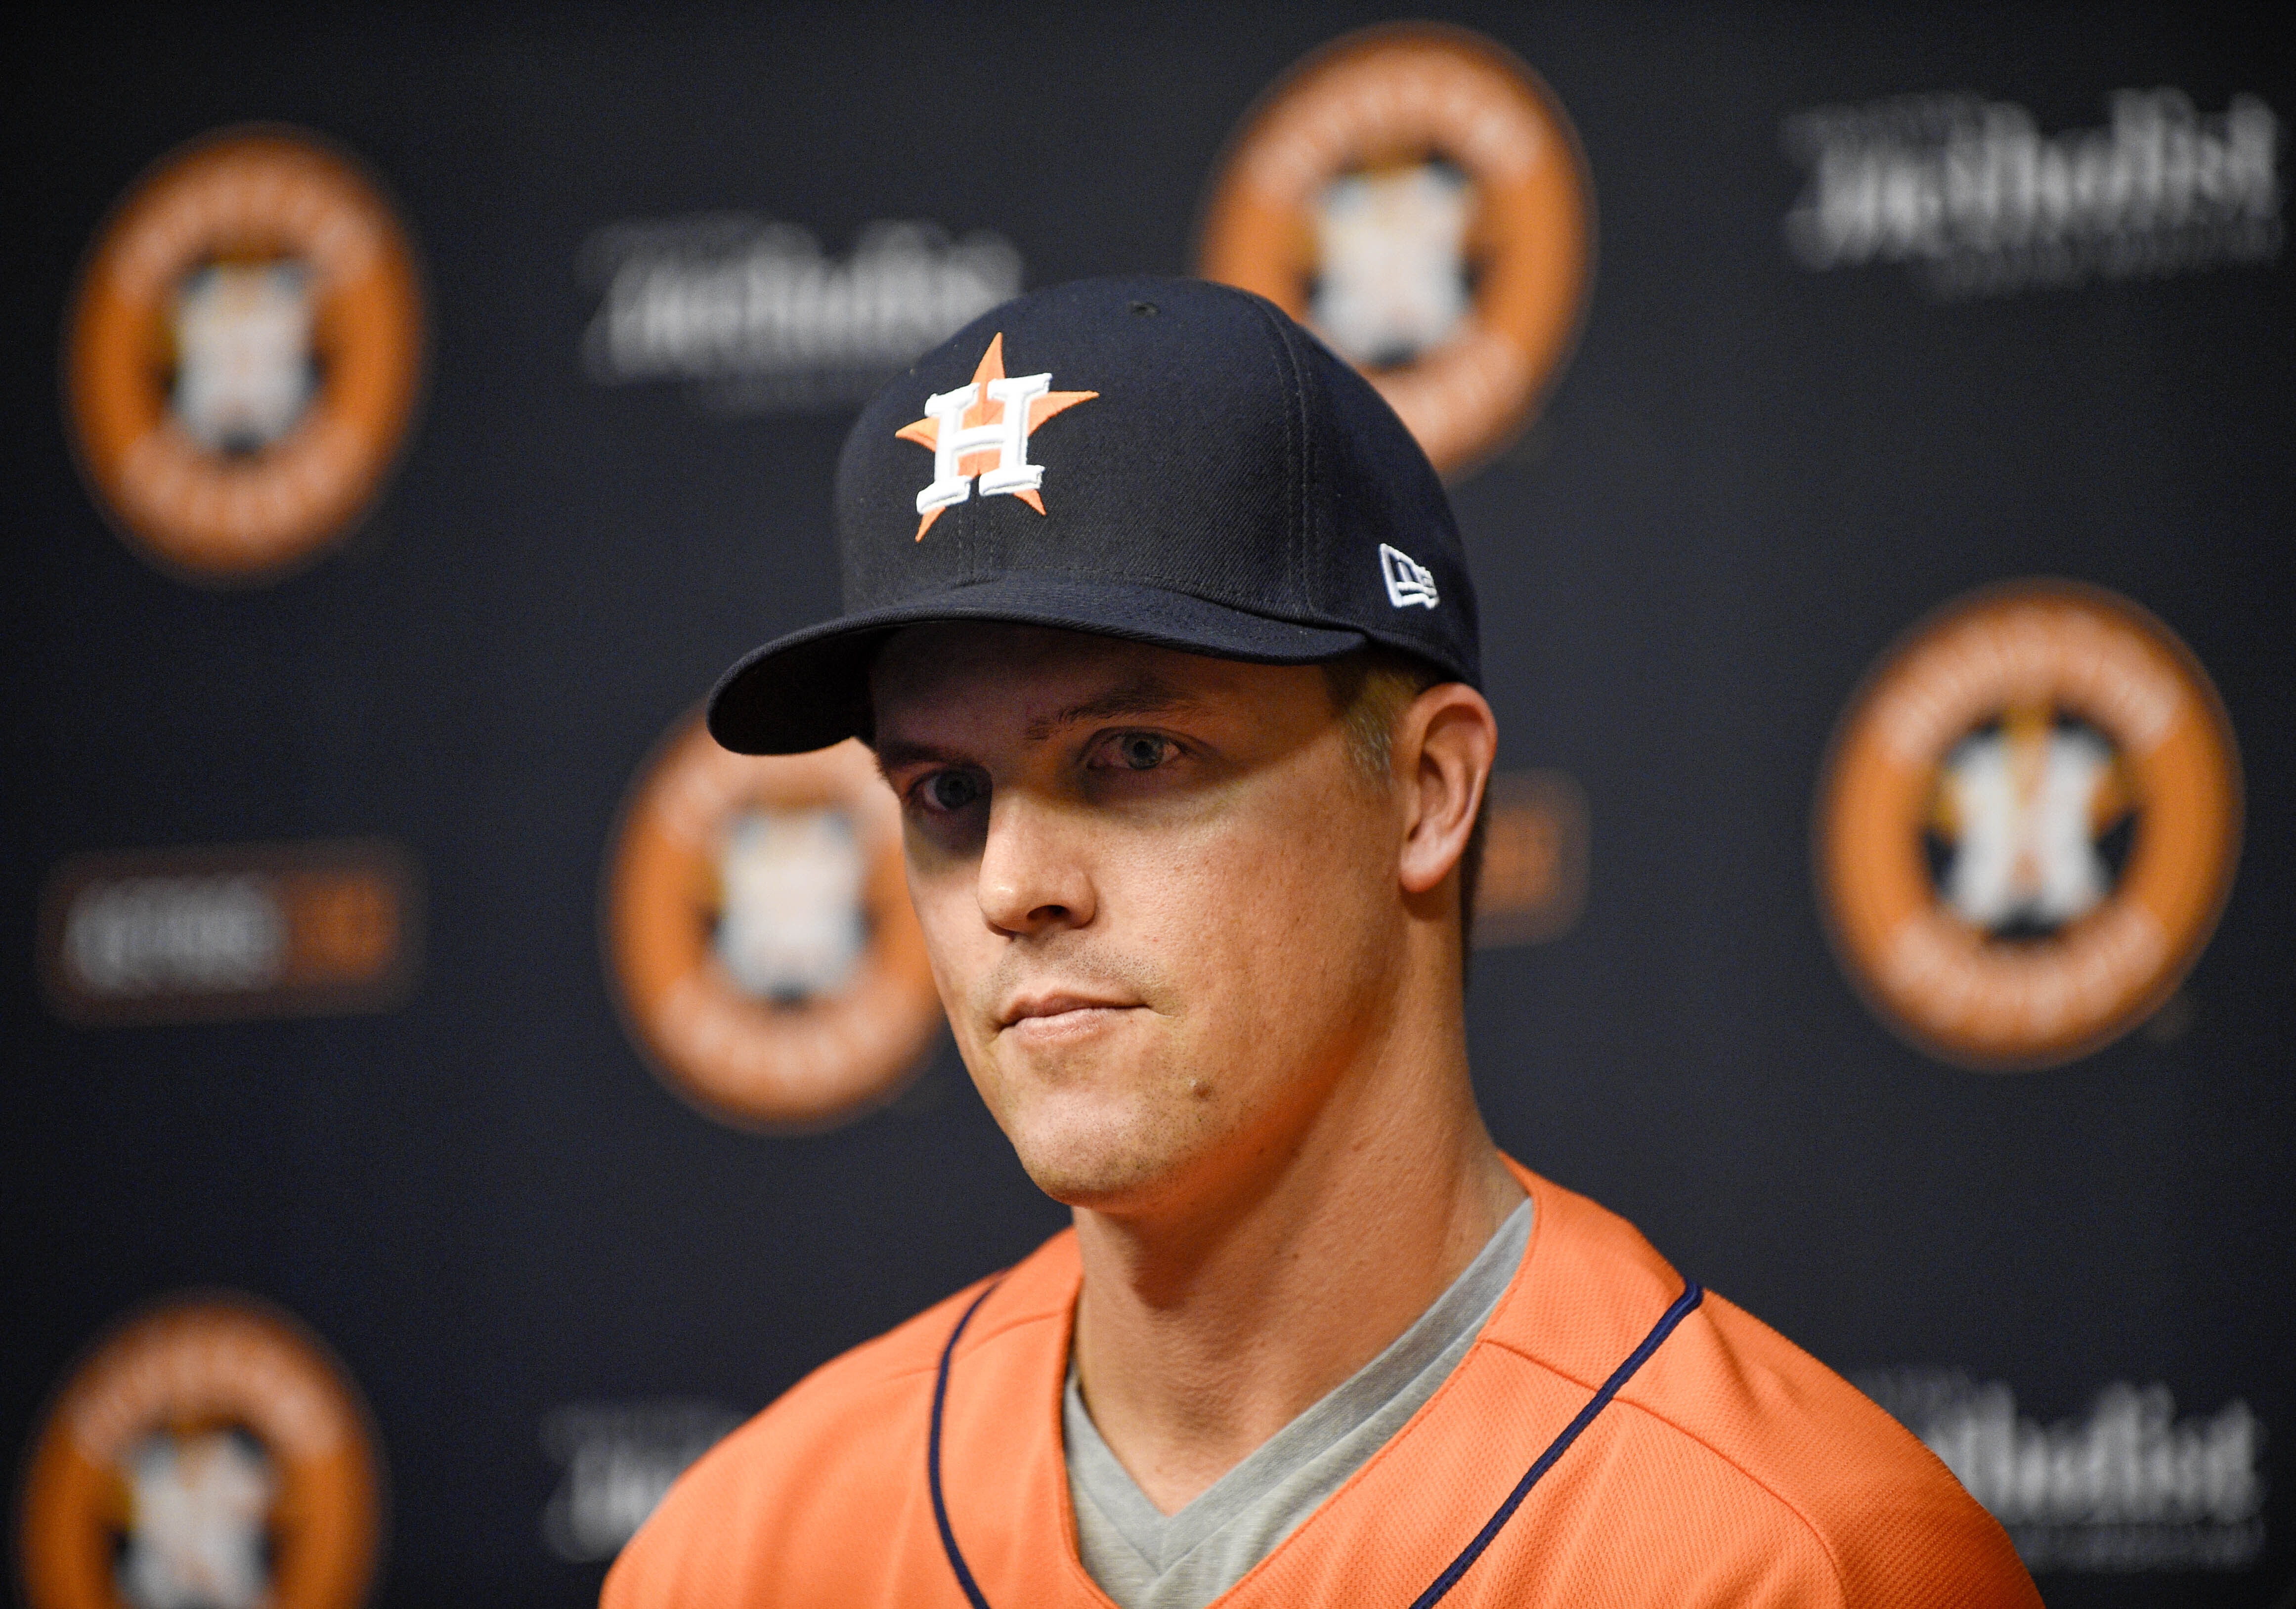 Zack Greinke blended in with fans at Astros-Mariners game